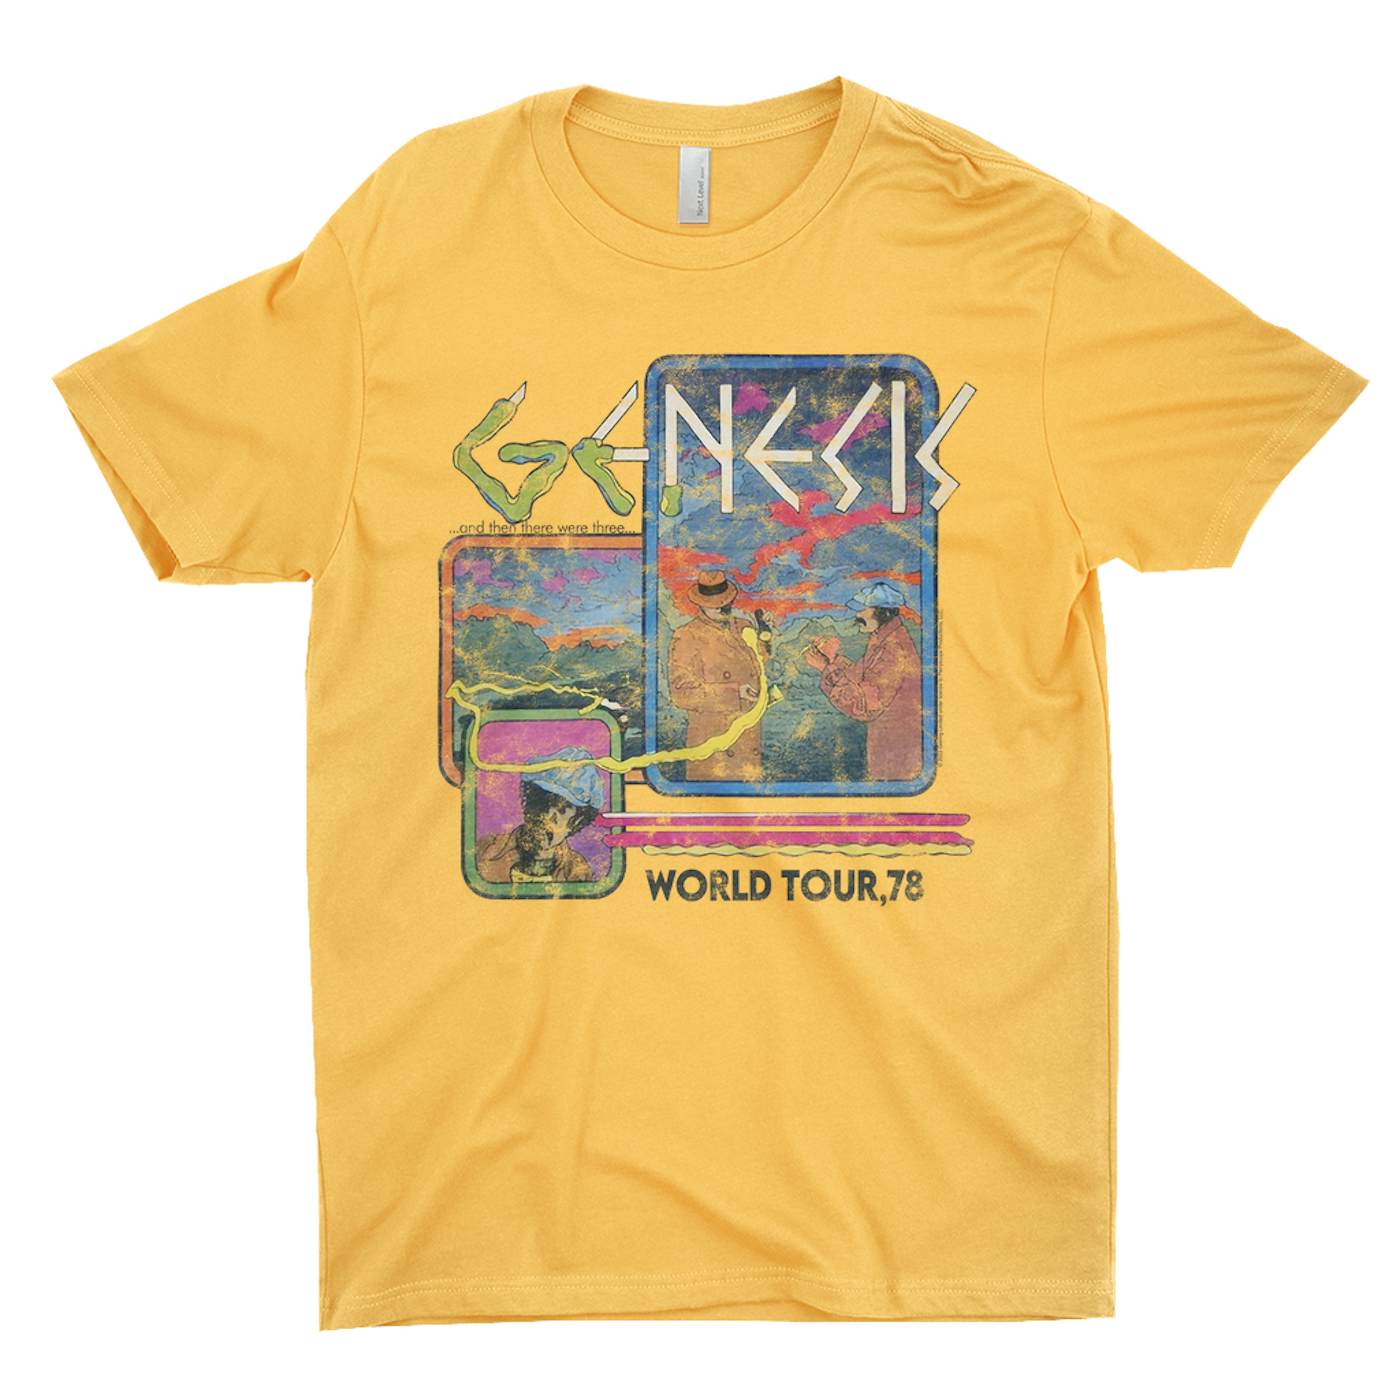 Genesis T-Shirt | And Then There Were Three '78 World Tour Distressed Genesis Shirt